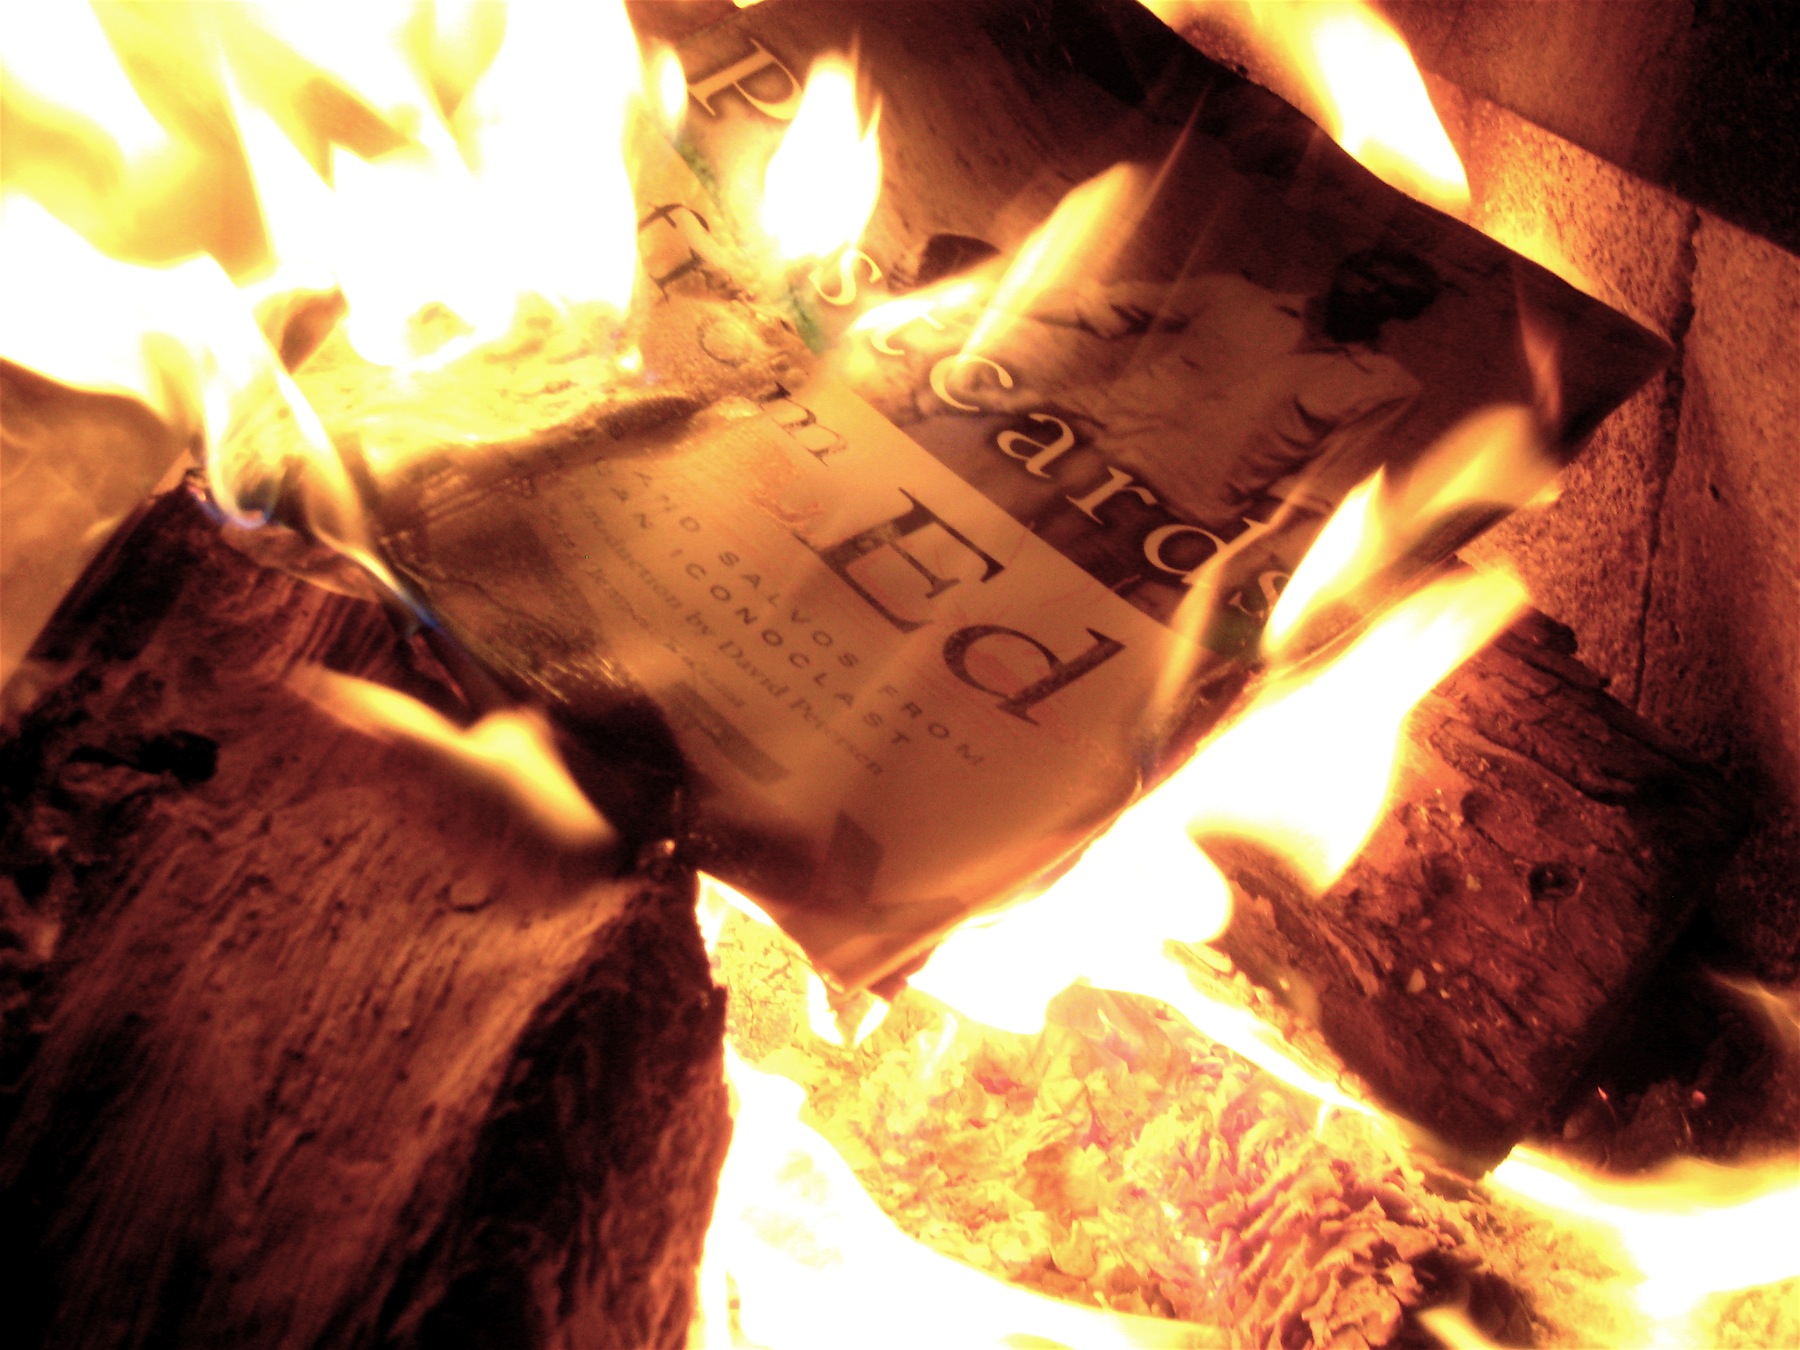 Read more about the article “Dort wo man Bücher verbrennt…”: A Look at the Burning of Books